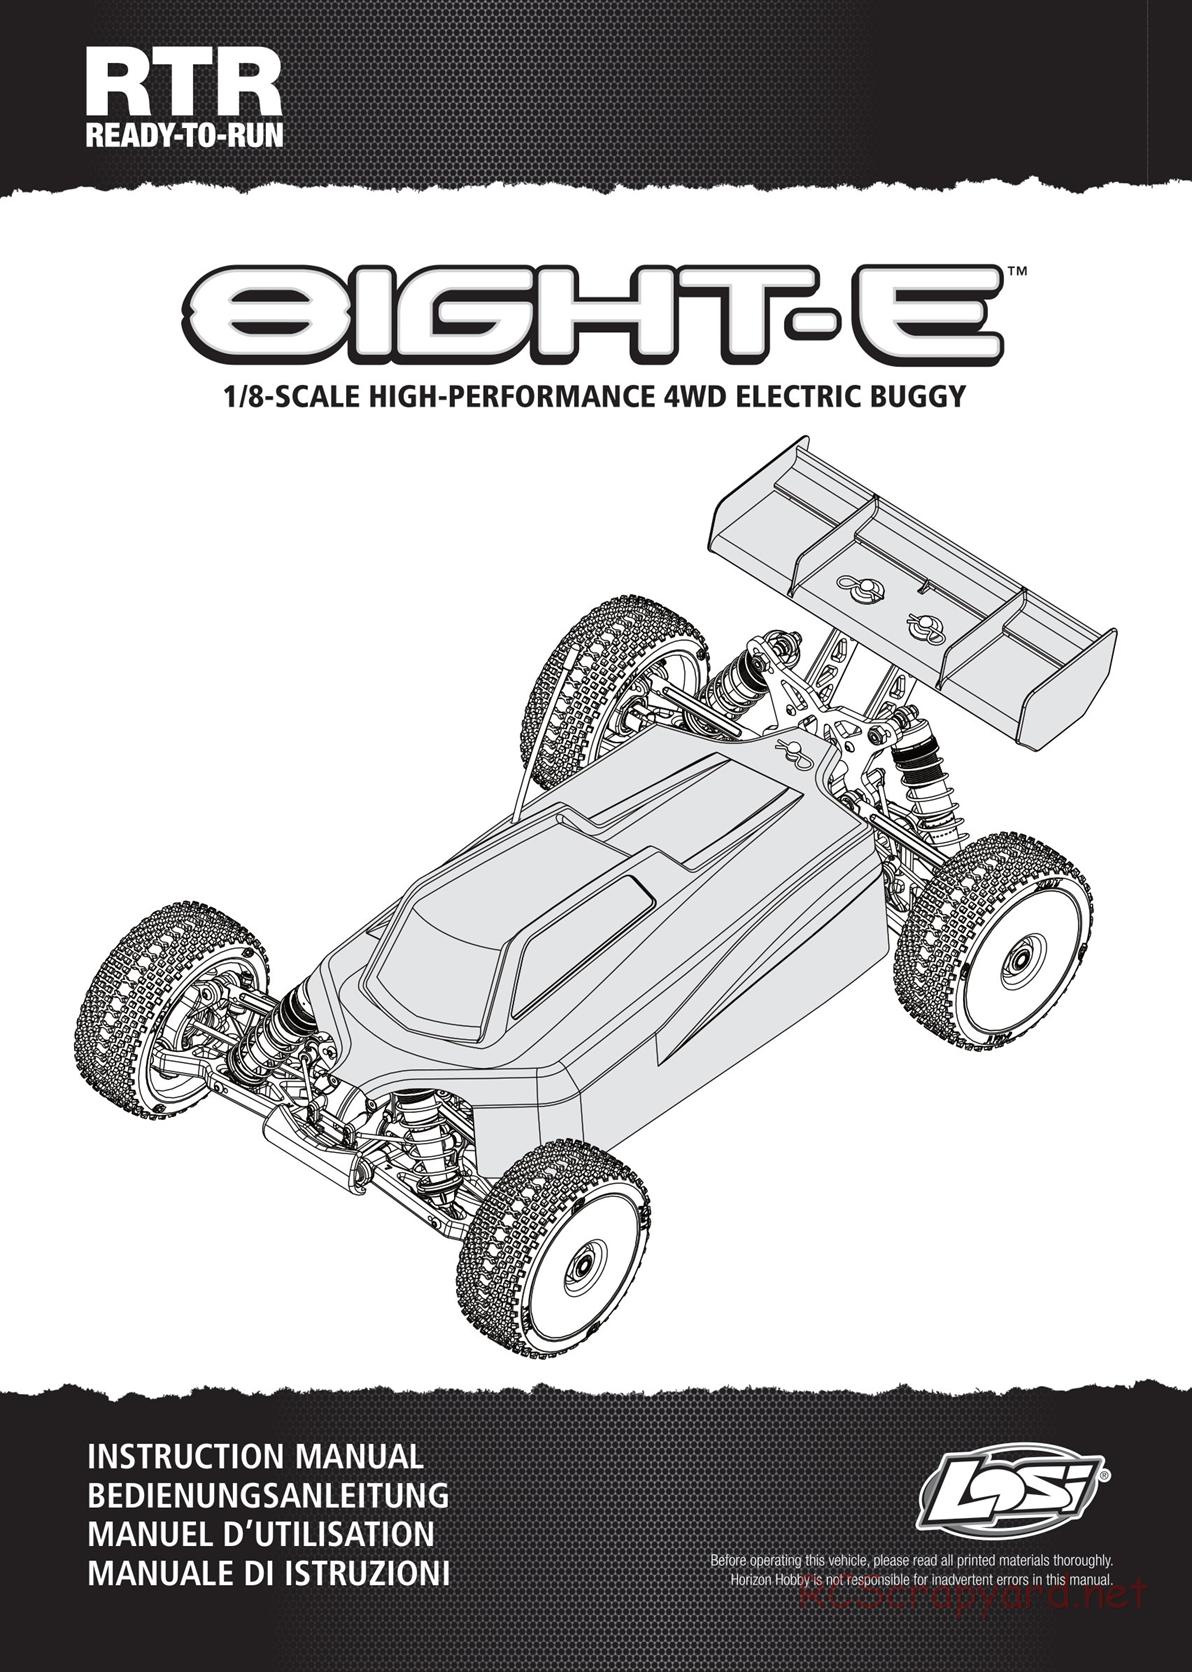 Team Losi - 8ight-E - Parts List and Exploded View - Page 1